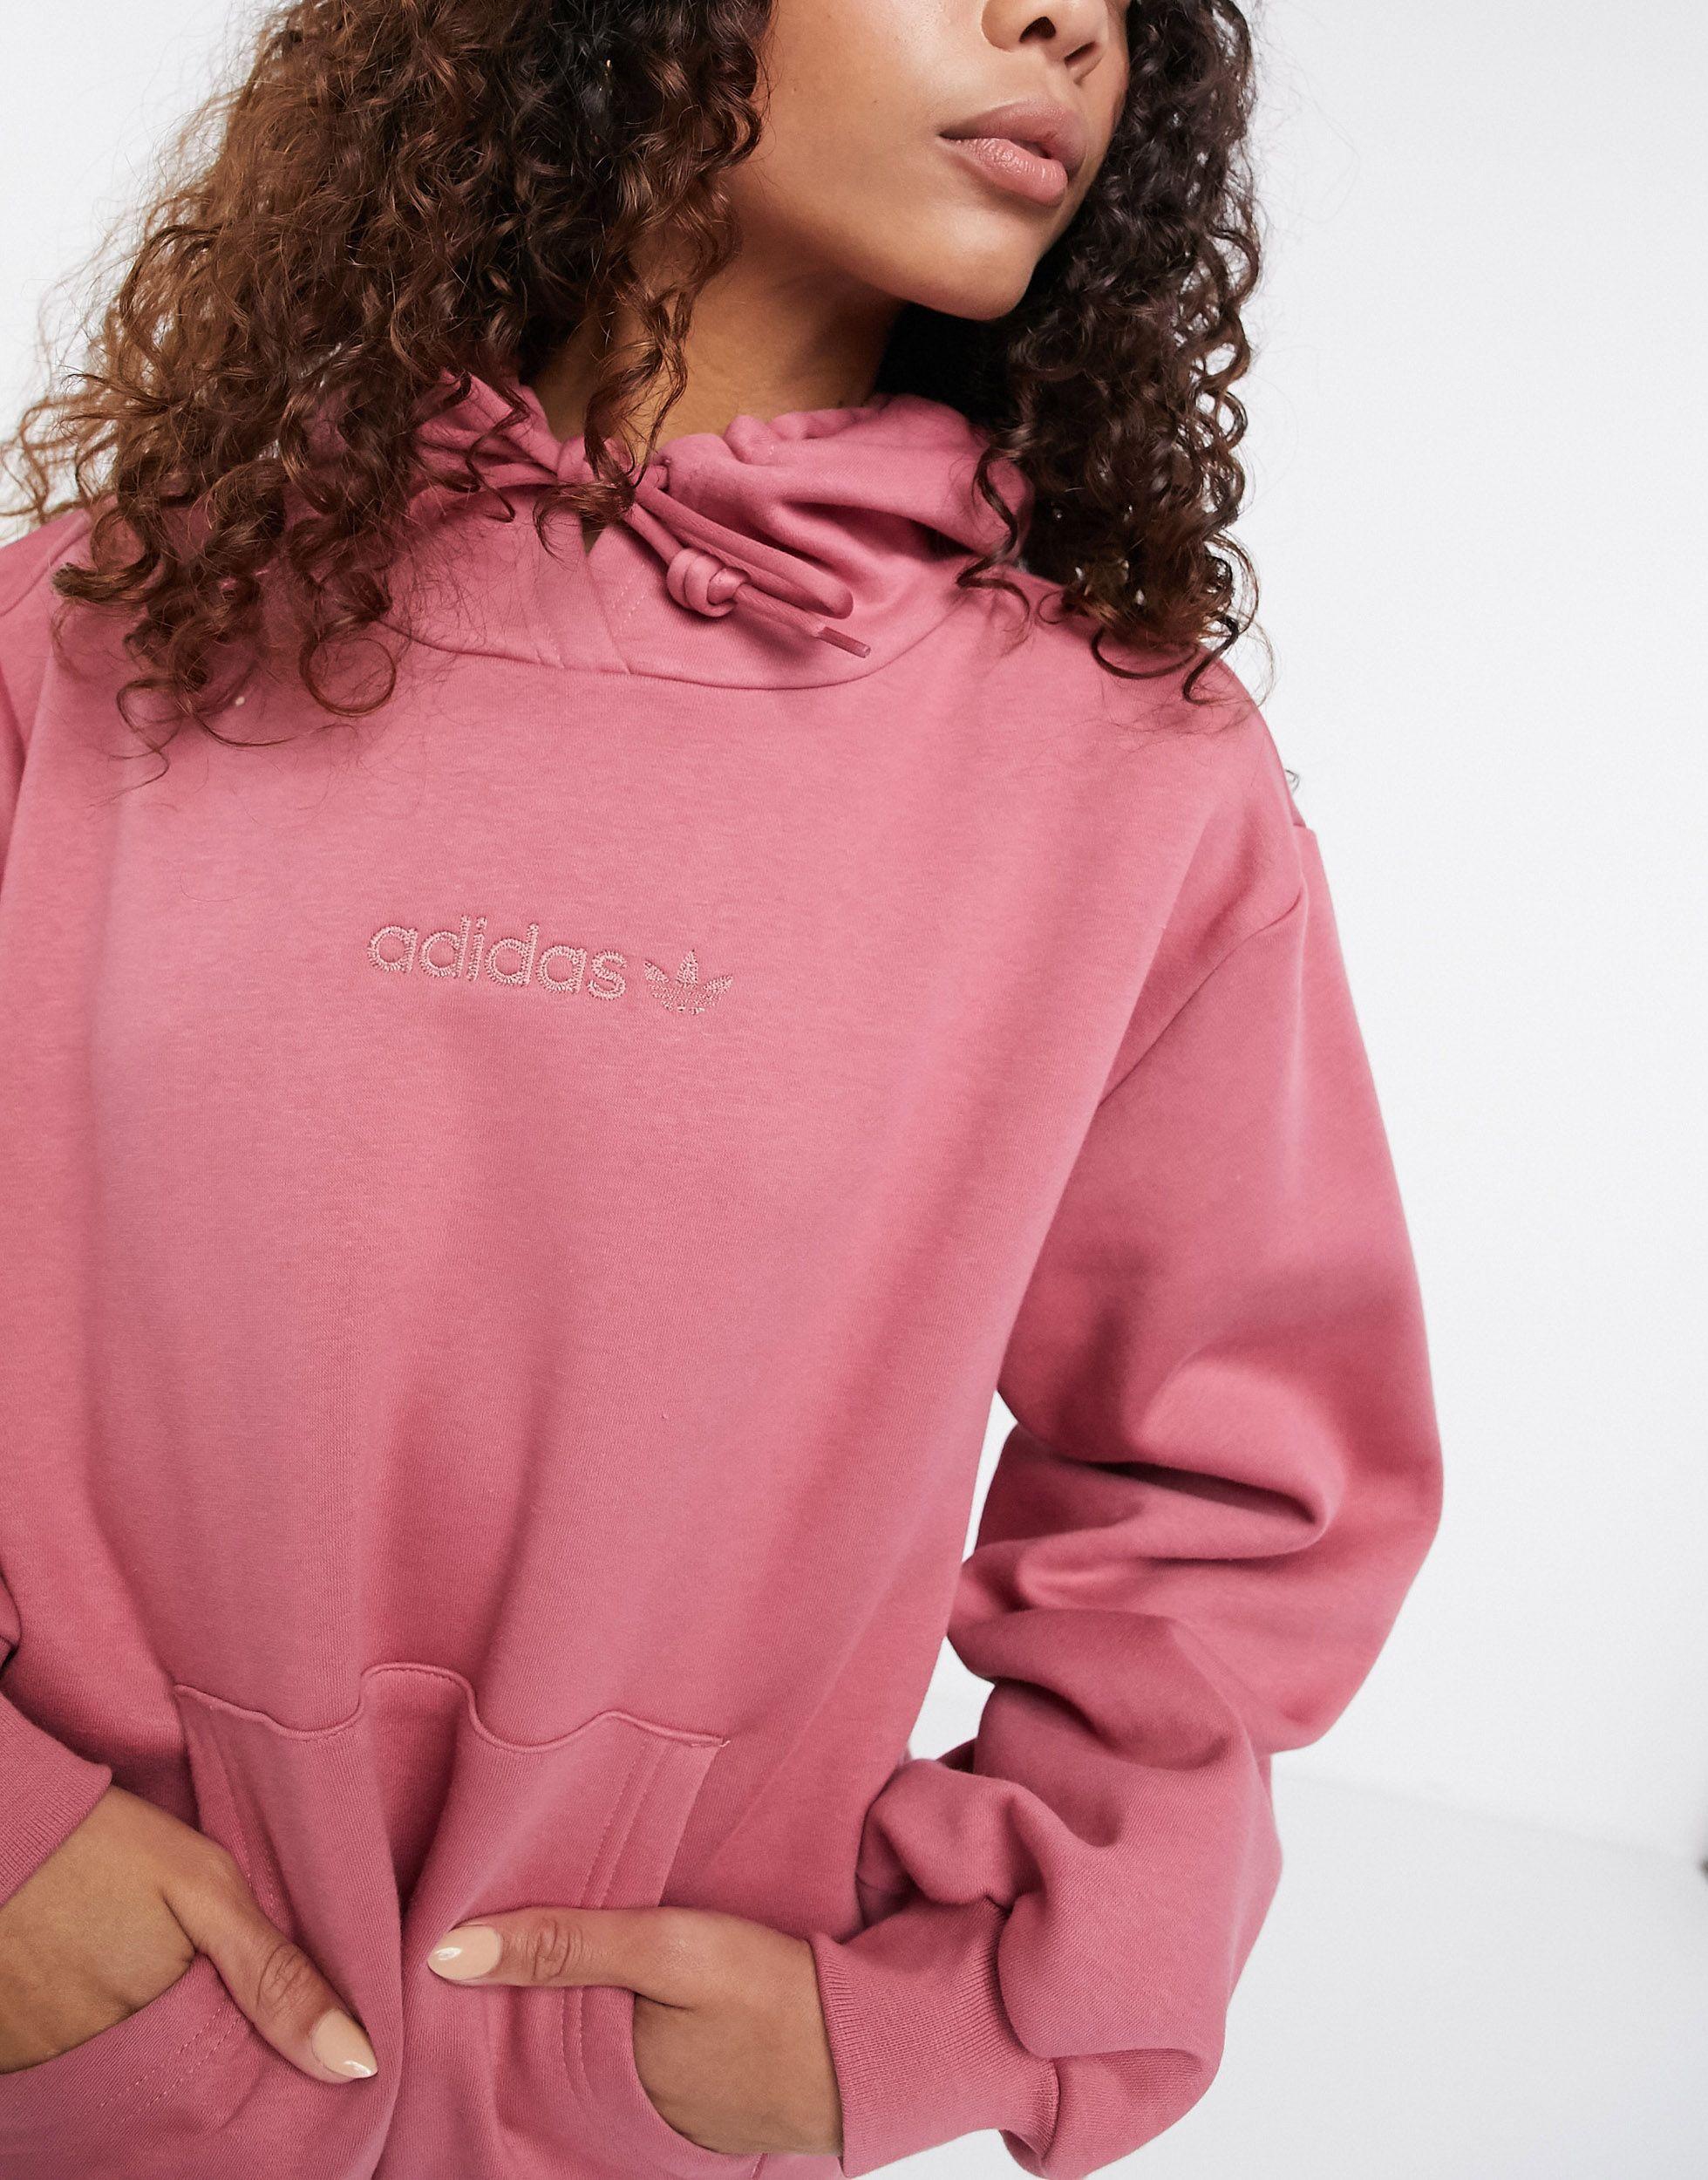 Adidas Cosy Sweatshirt Clearance, SAVE 35% - aveclumiere.com